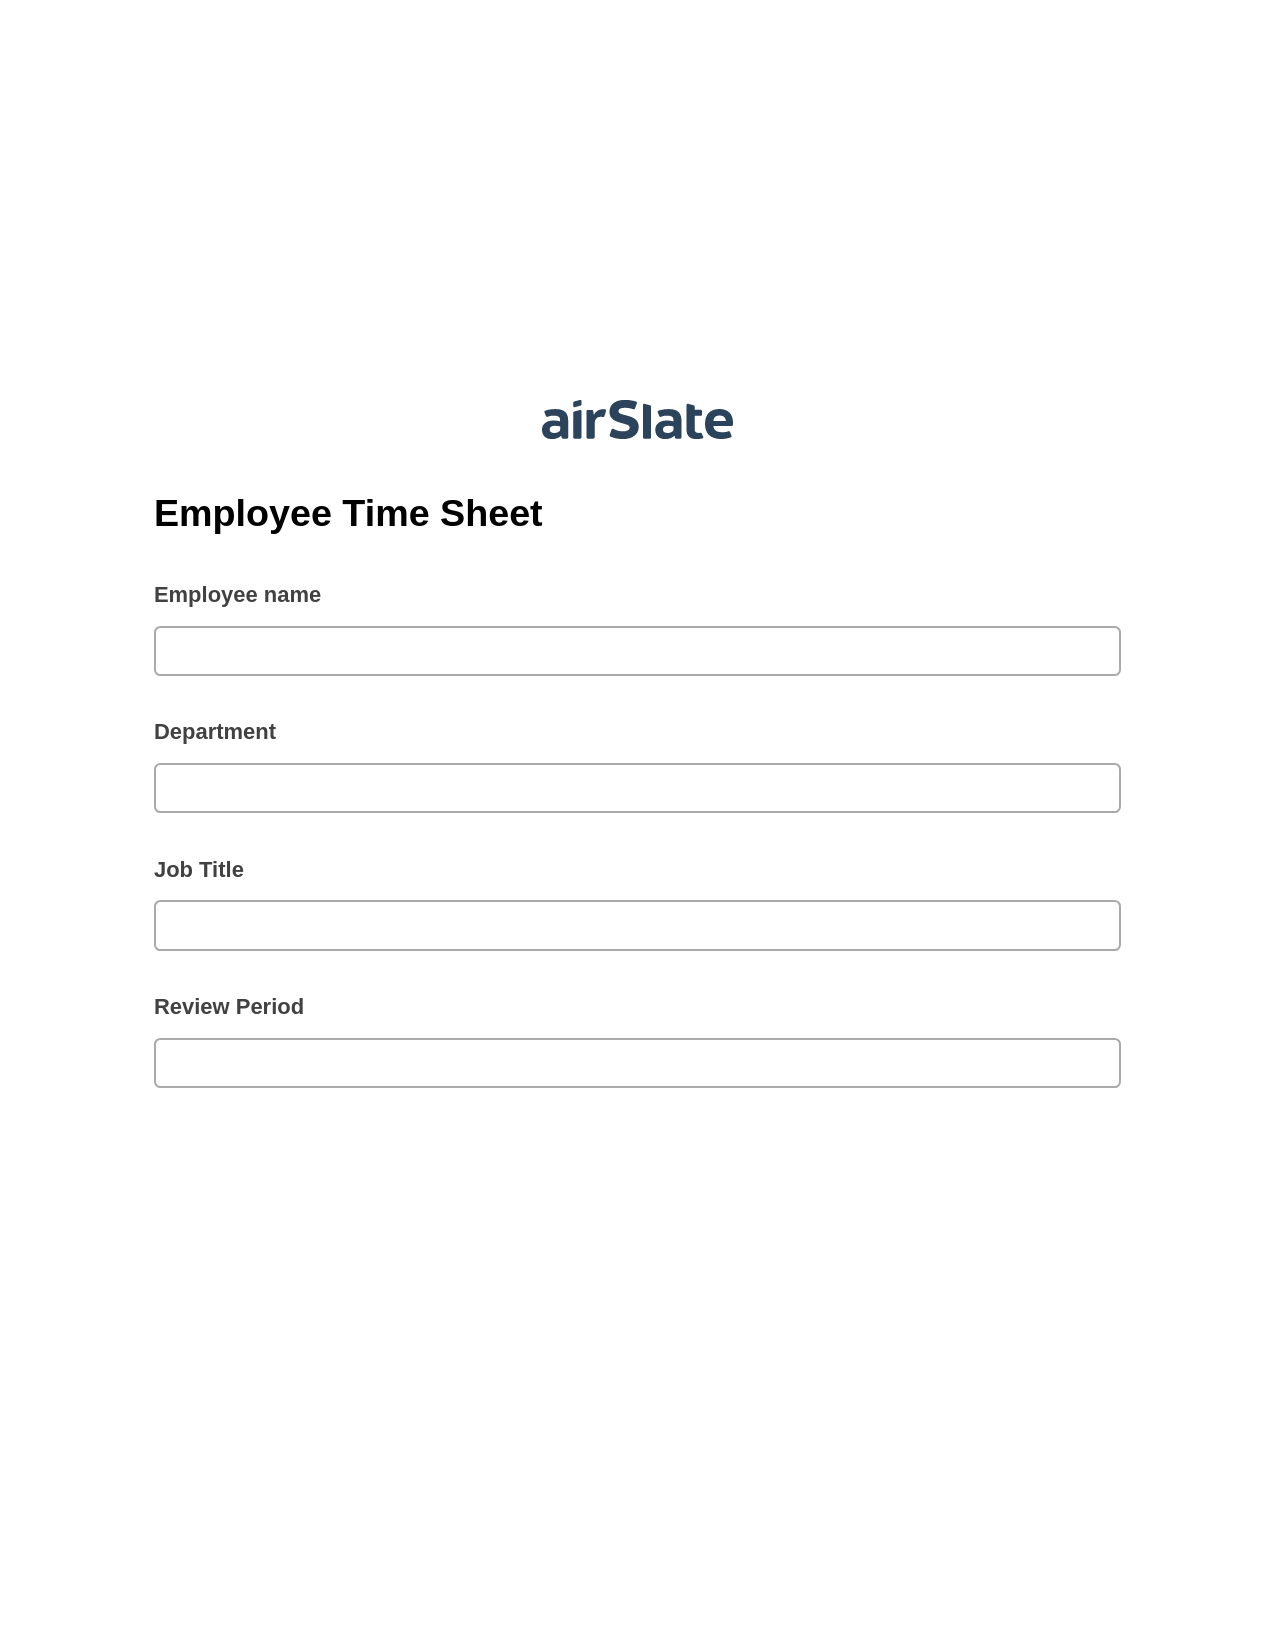 Employee Time Sheet Pre-fill Dropdowns from Airtable, Create Salesforce Records Bot, Export to Smartsheet